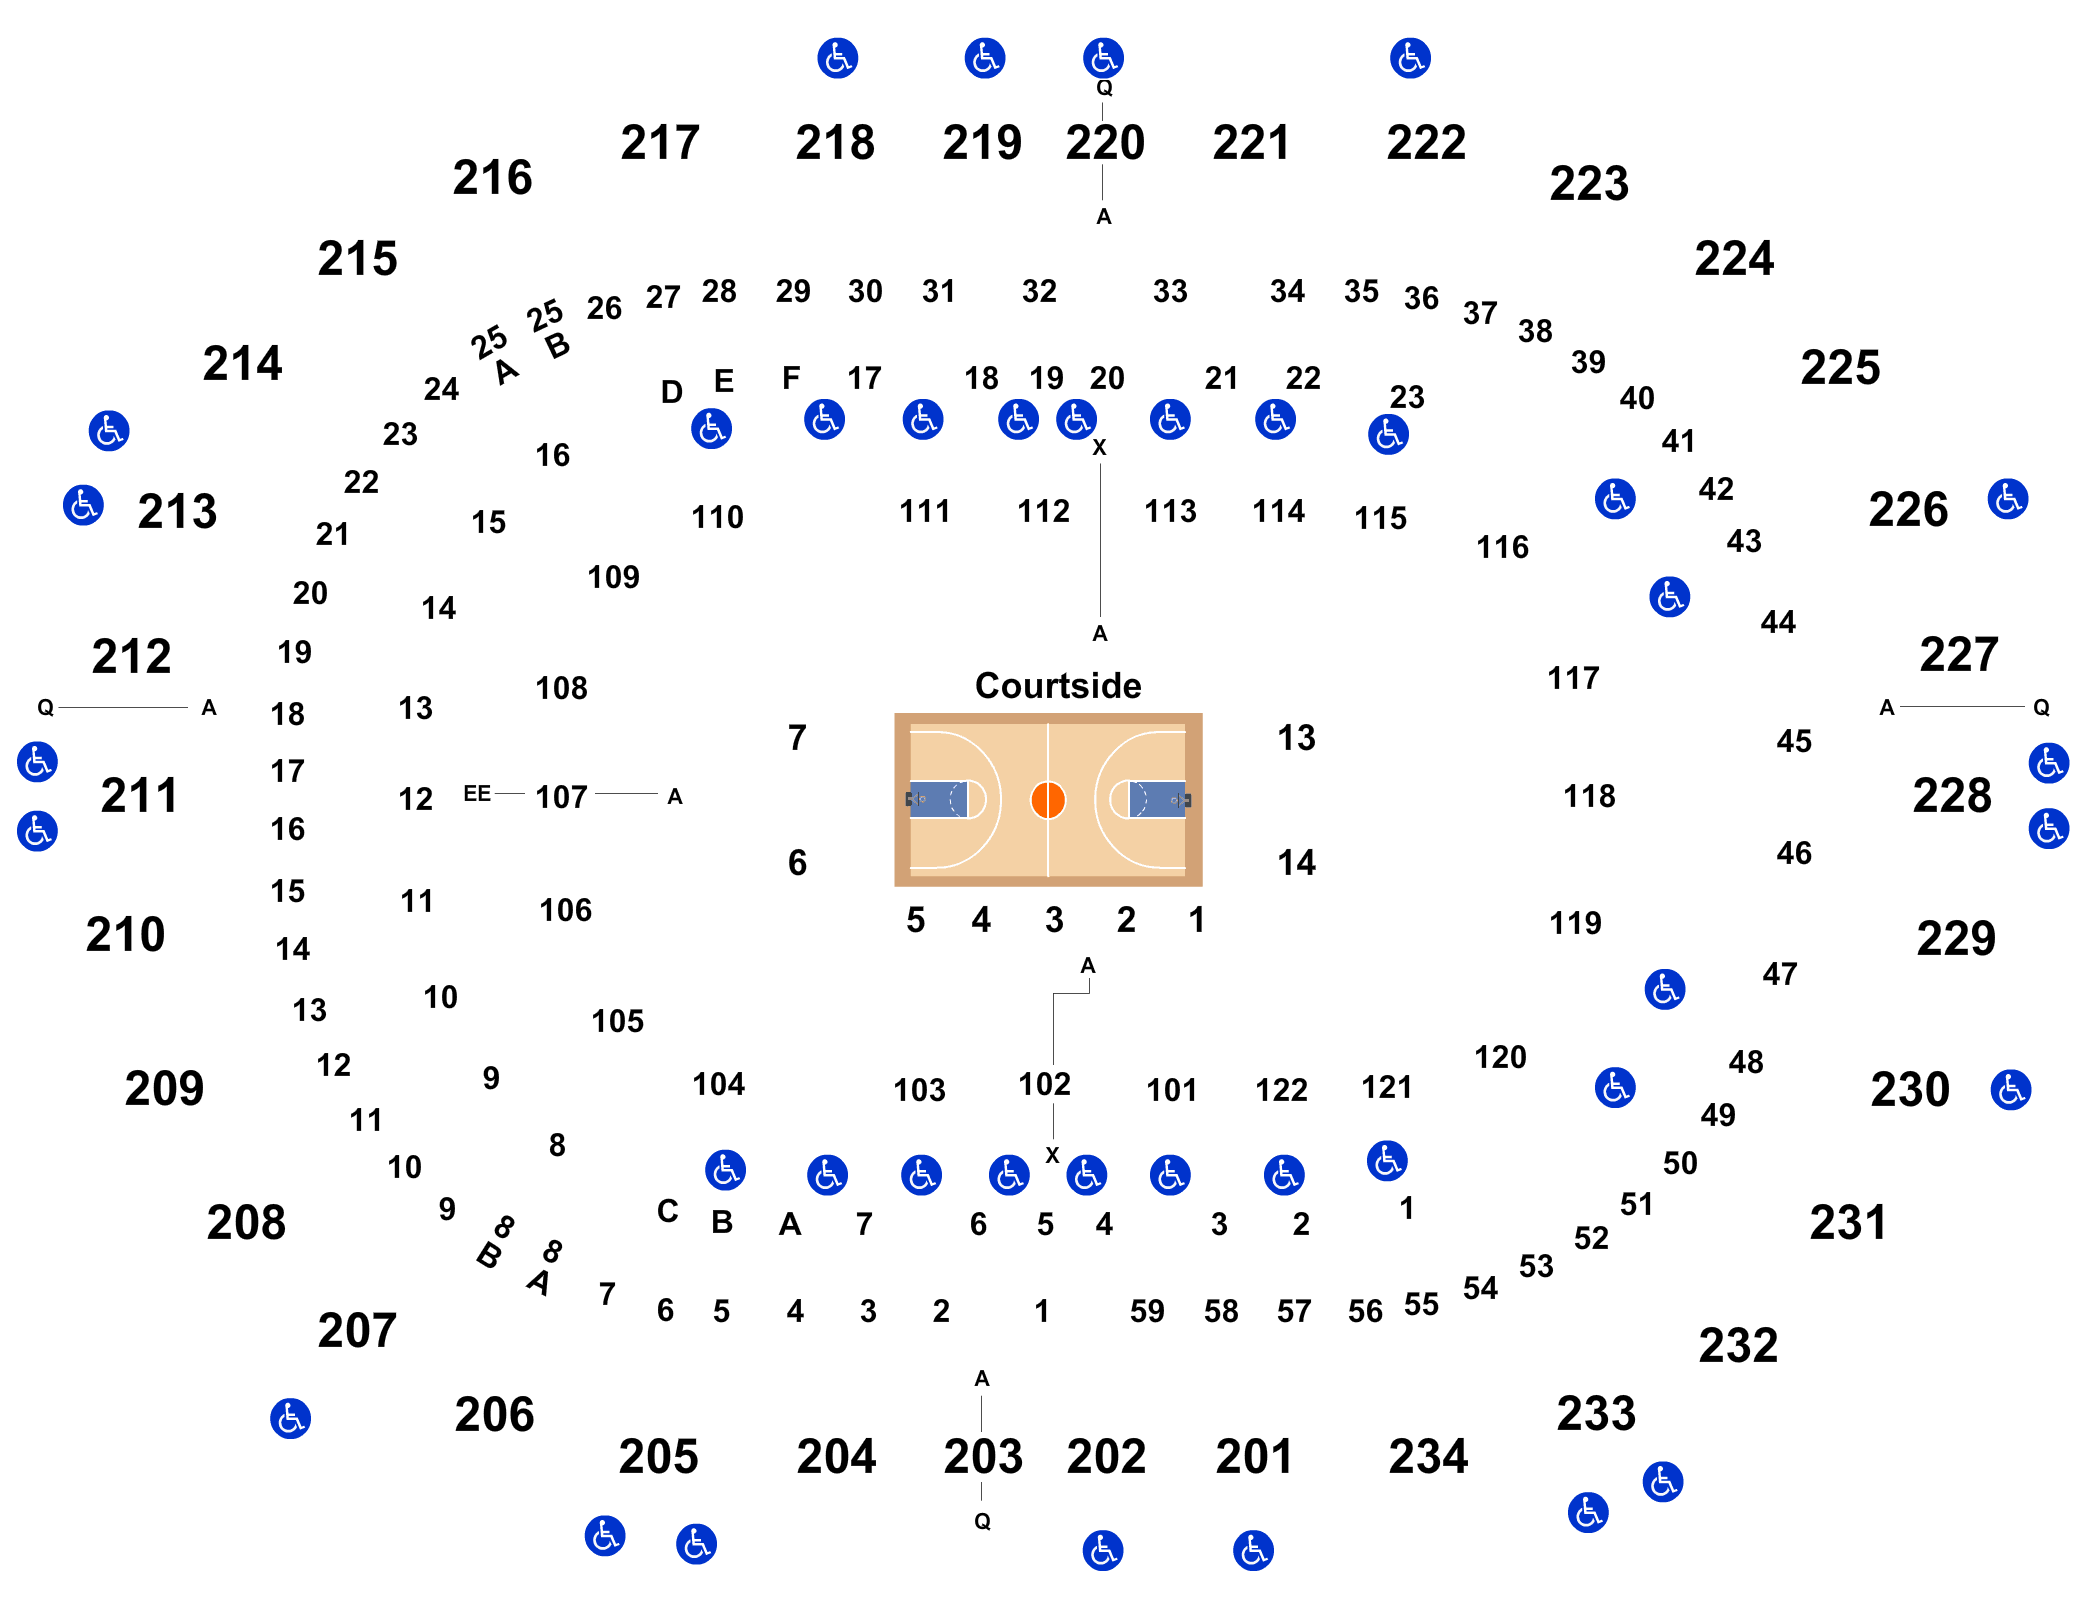 PPG Paints Arena seat & row numbers detailed seating chart